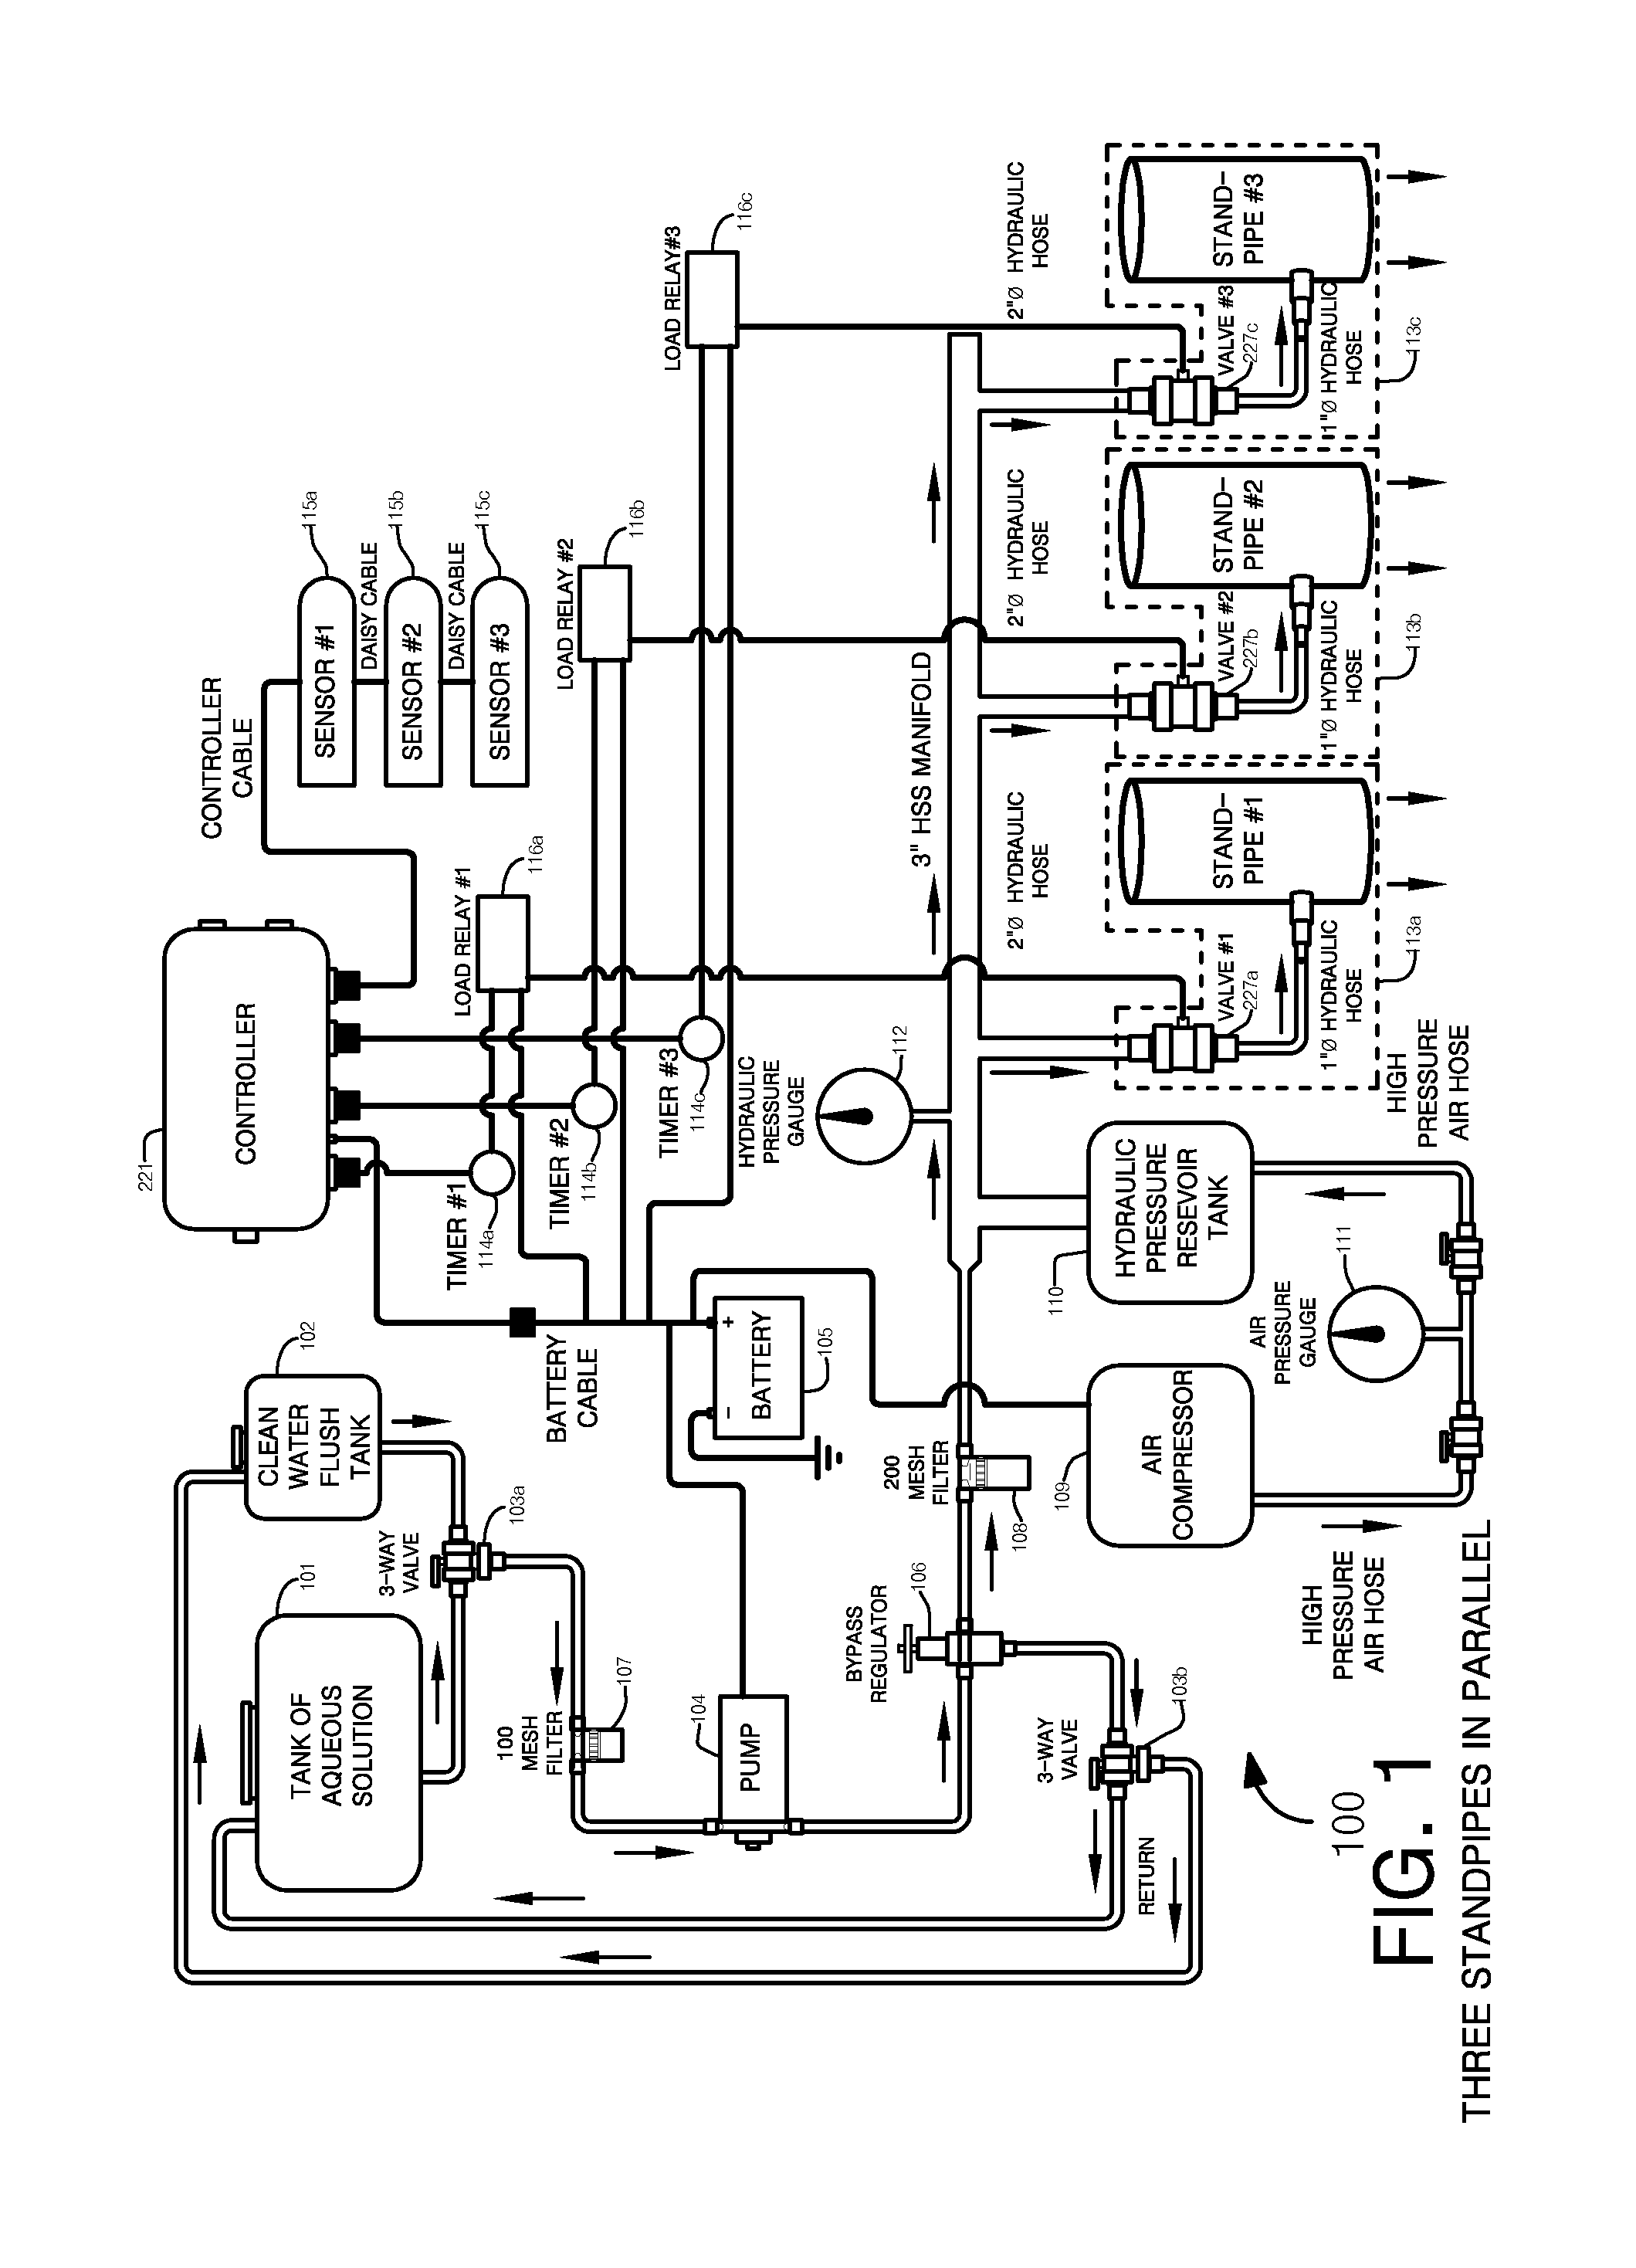 Apparatus and method for localized irrigation and application of fertilizers, herbicides, or pesticides to row crops